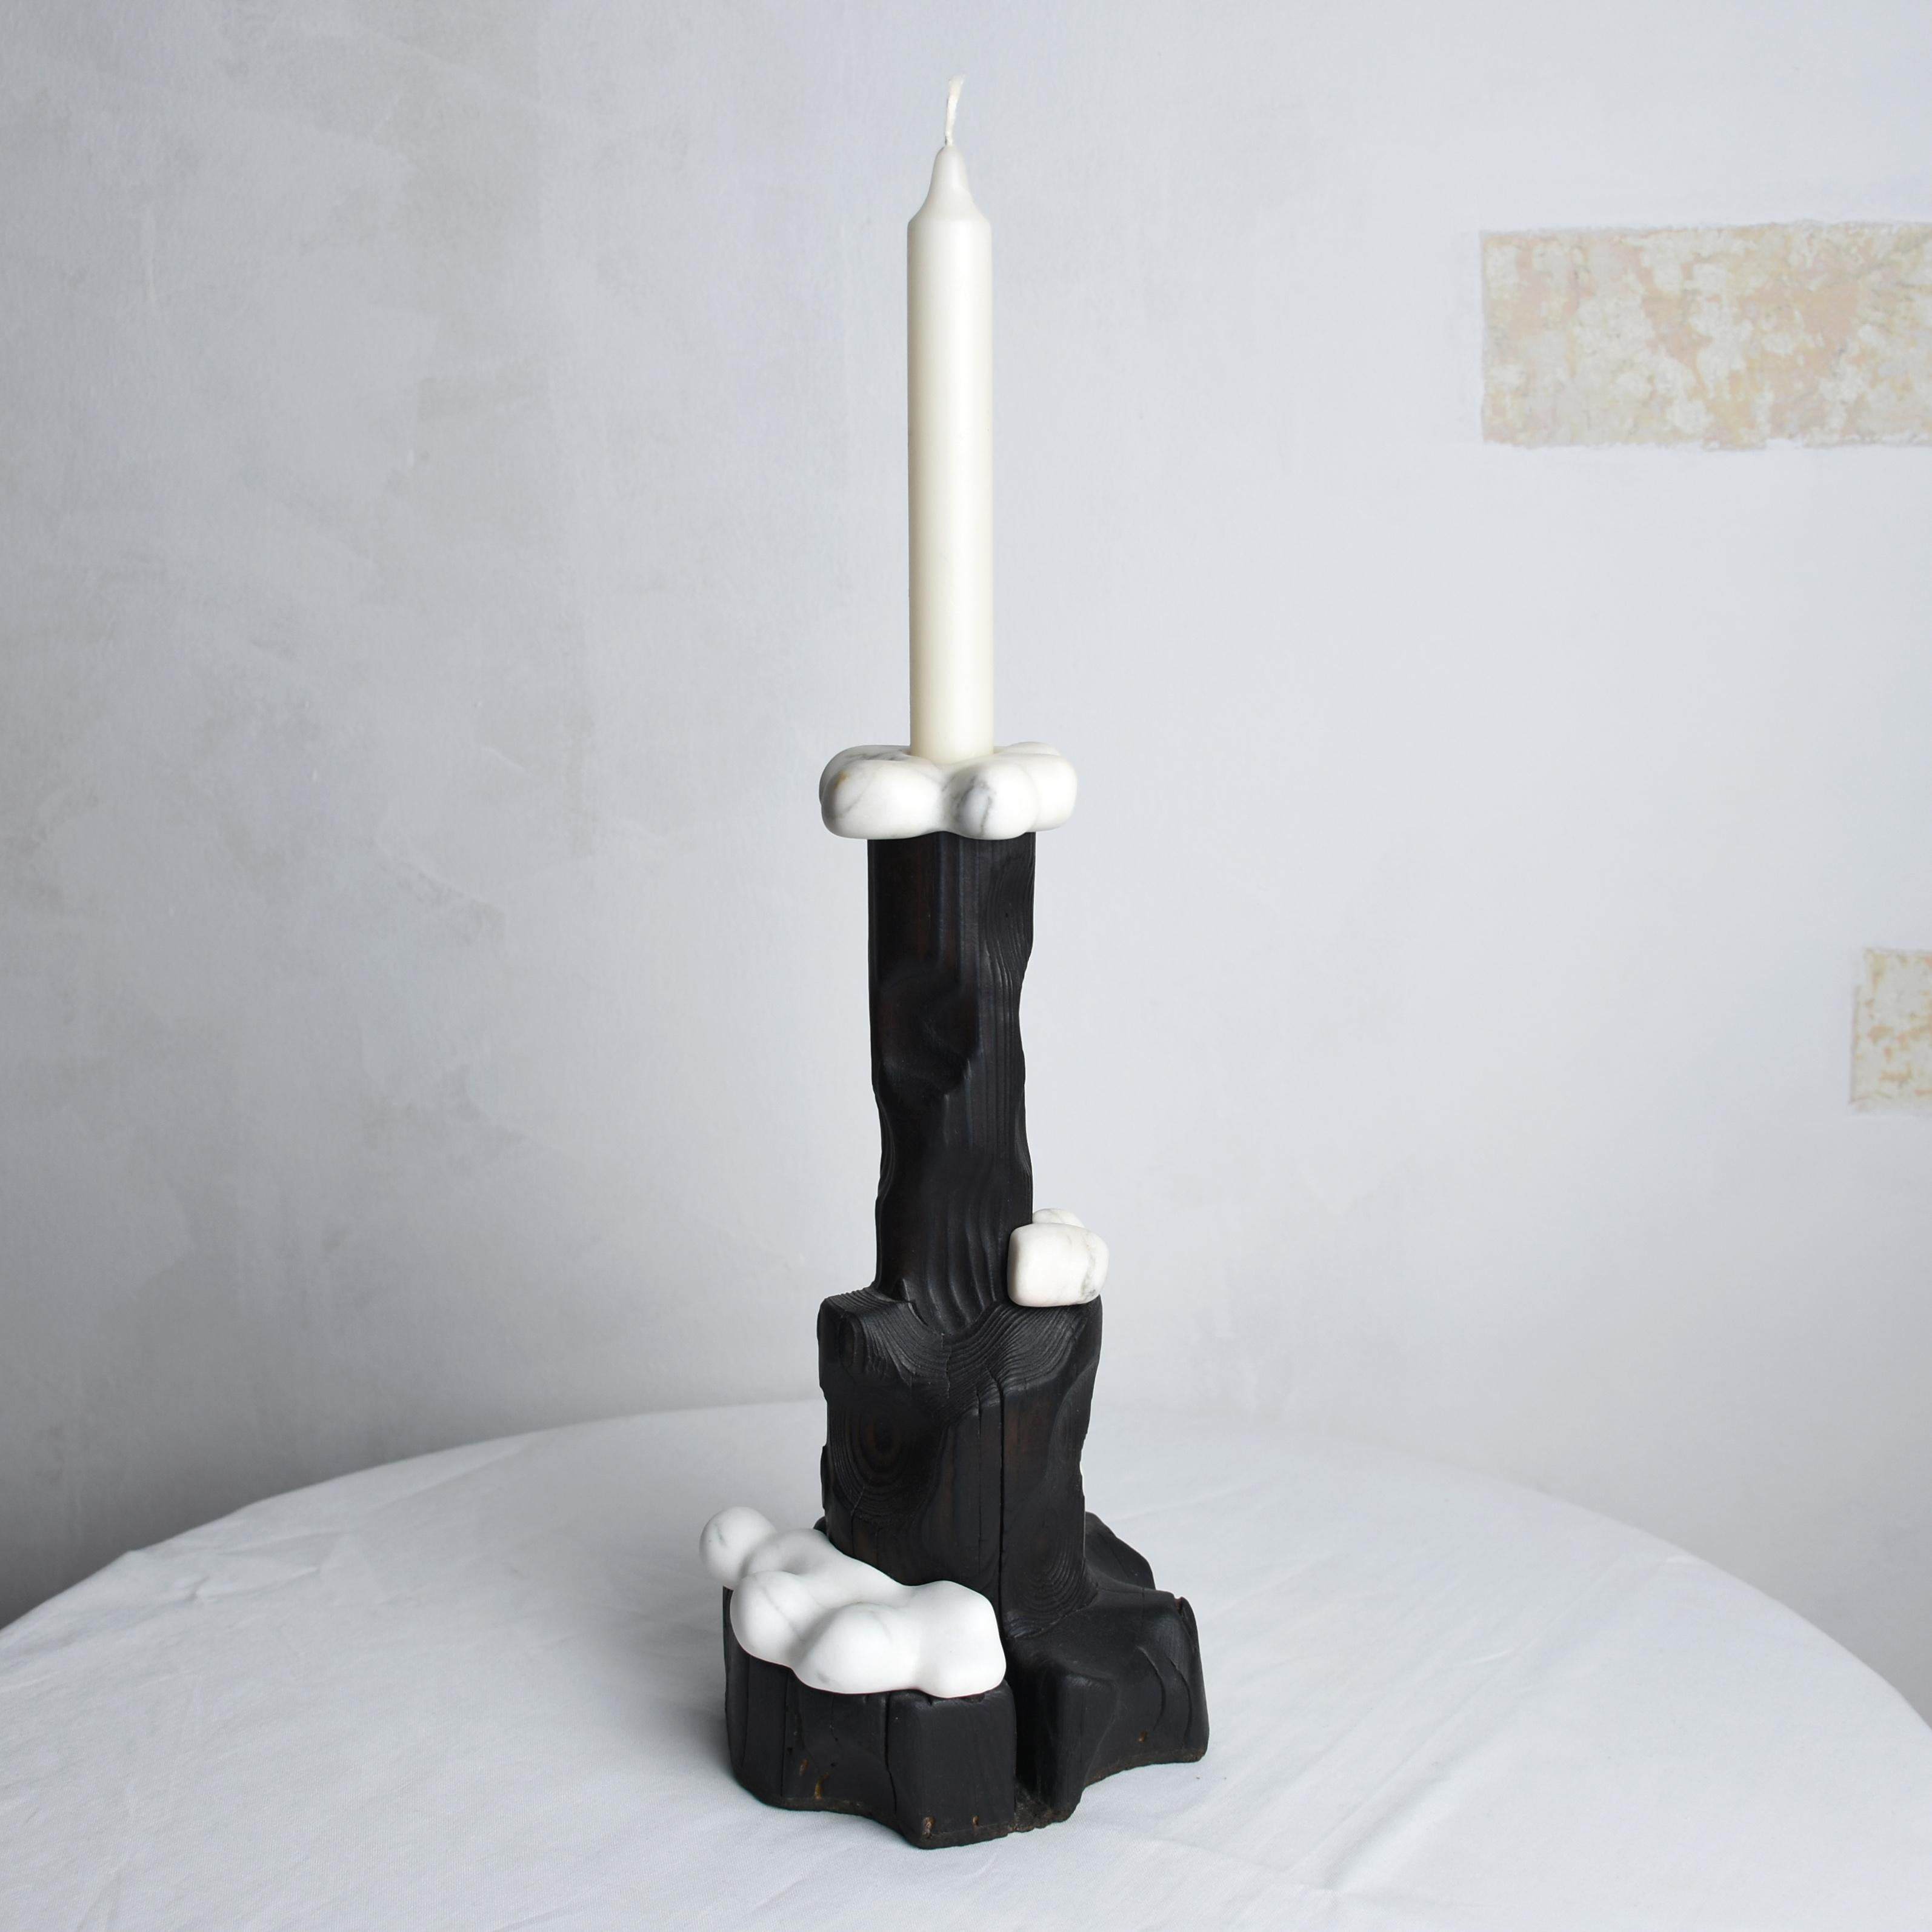 Cumulus, Sculptured Candle Holder from Reclaimed Burned Wood and White Marble For Sale 4